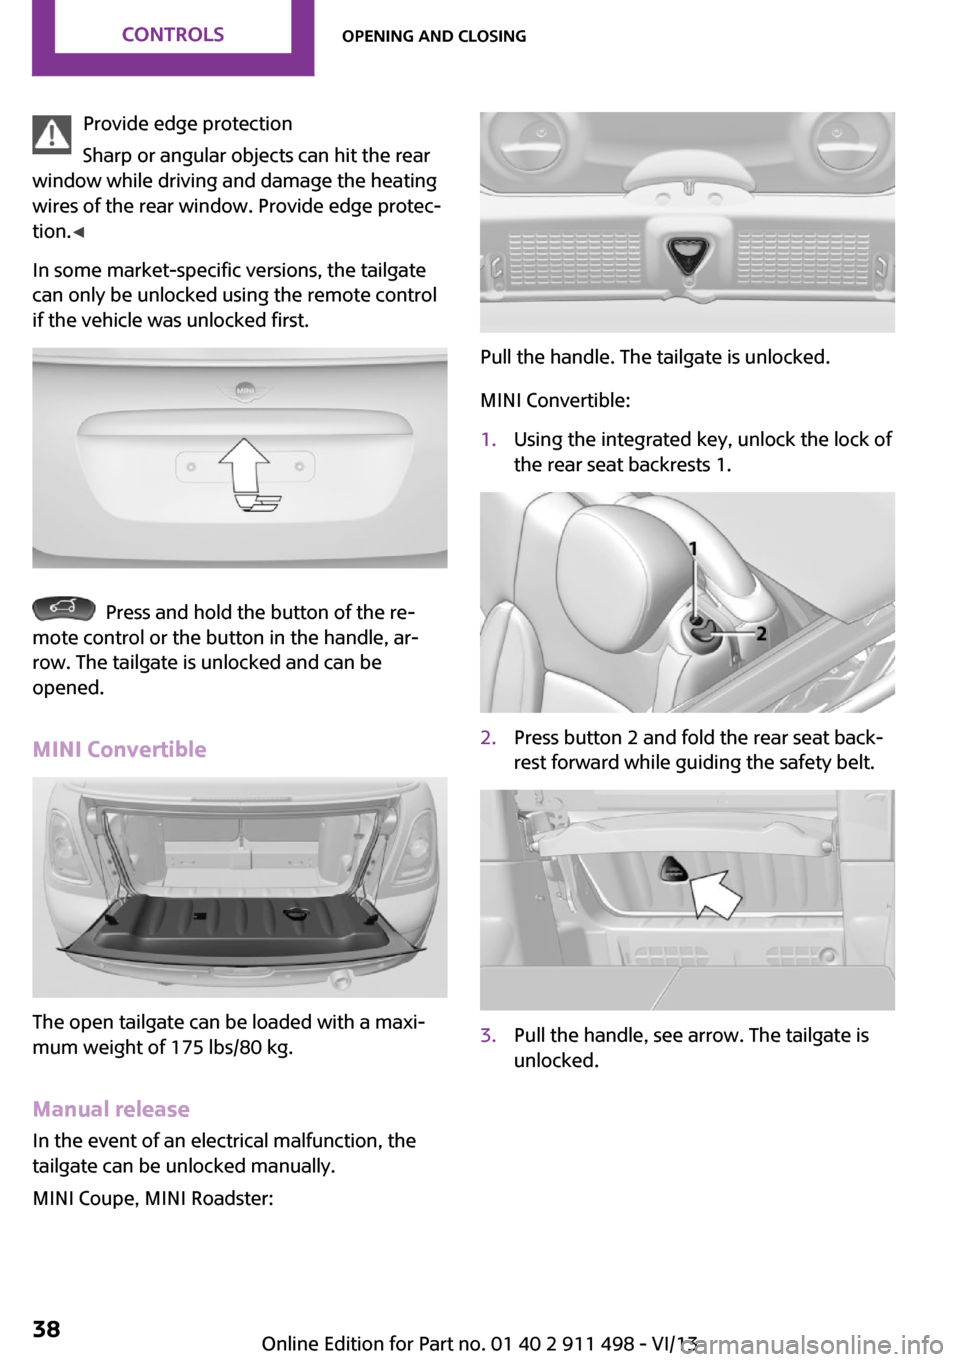 MINI Roadster 2014   (Mini Connected) Owners Guide Provide edge protection
Sharp or angular objects can hit the rear
window while driving and damage the heating
wires of the rear window. Provide edge protec‐
tion. ◀
In some market-specific version